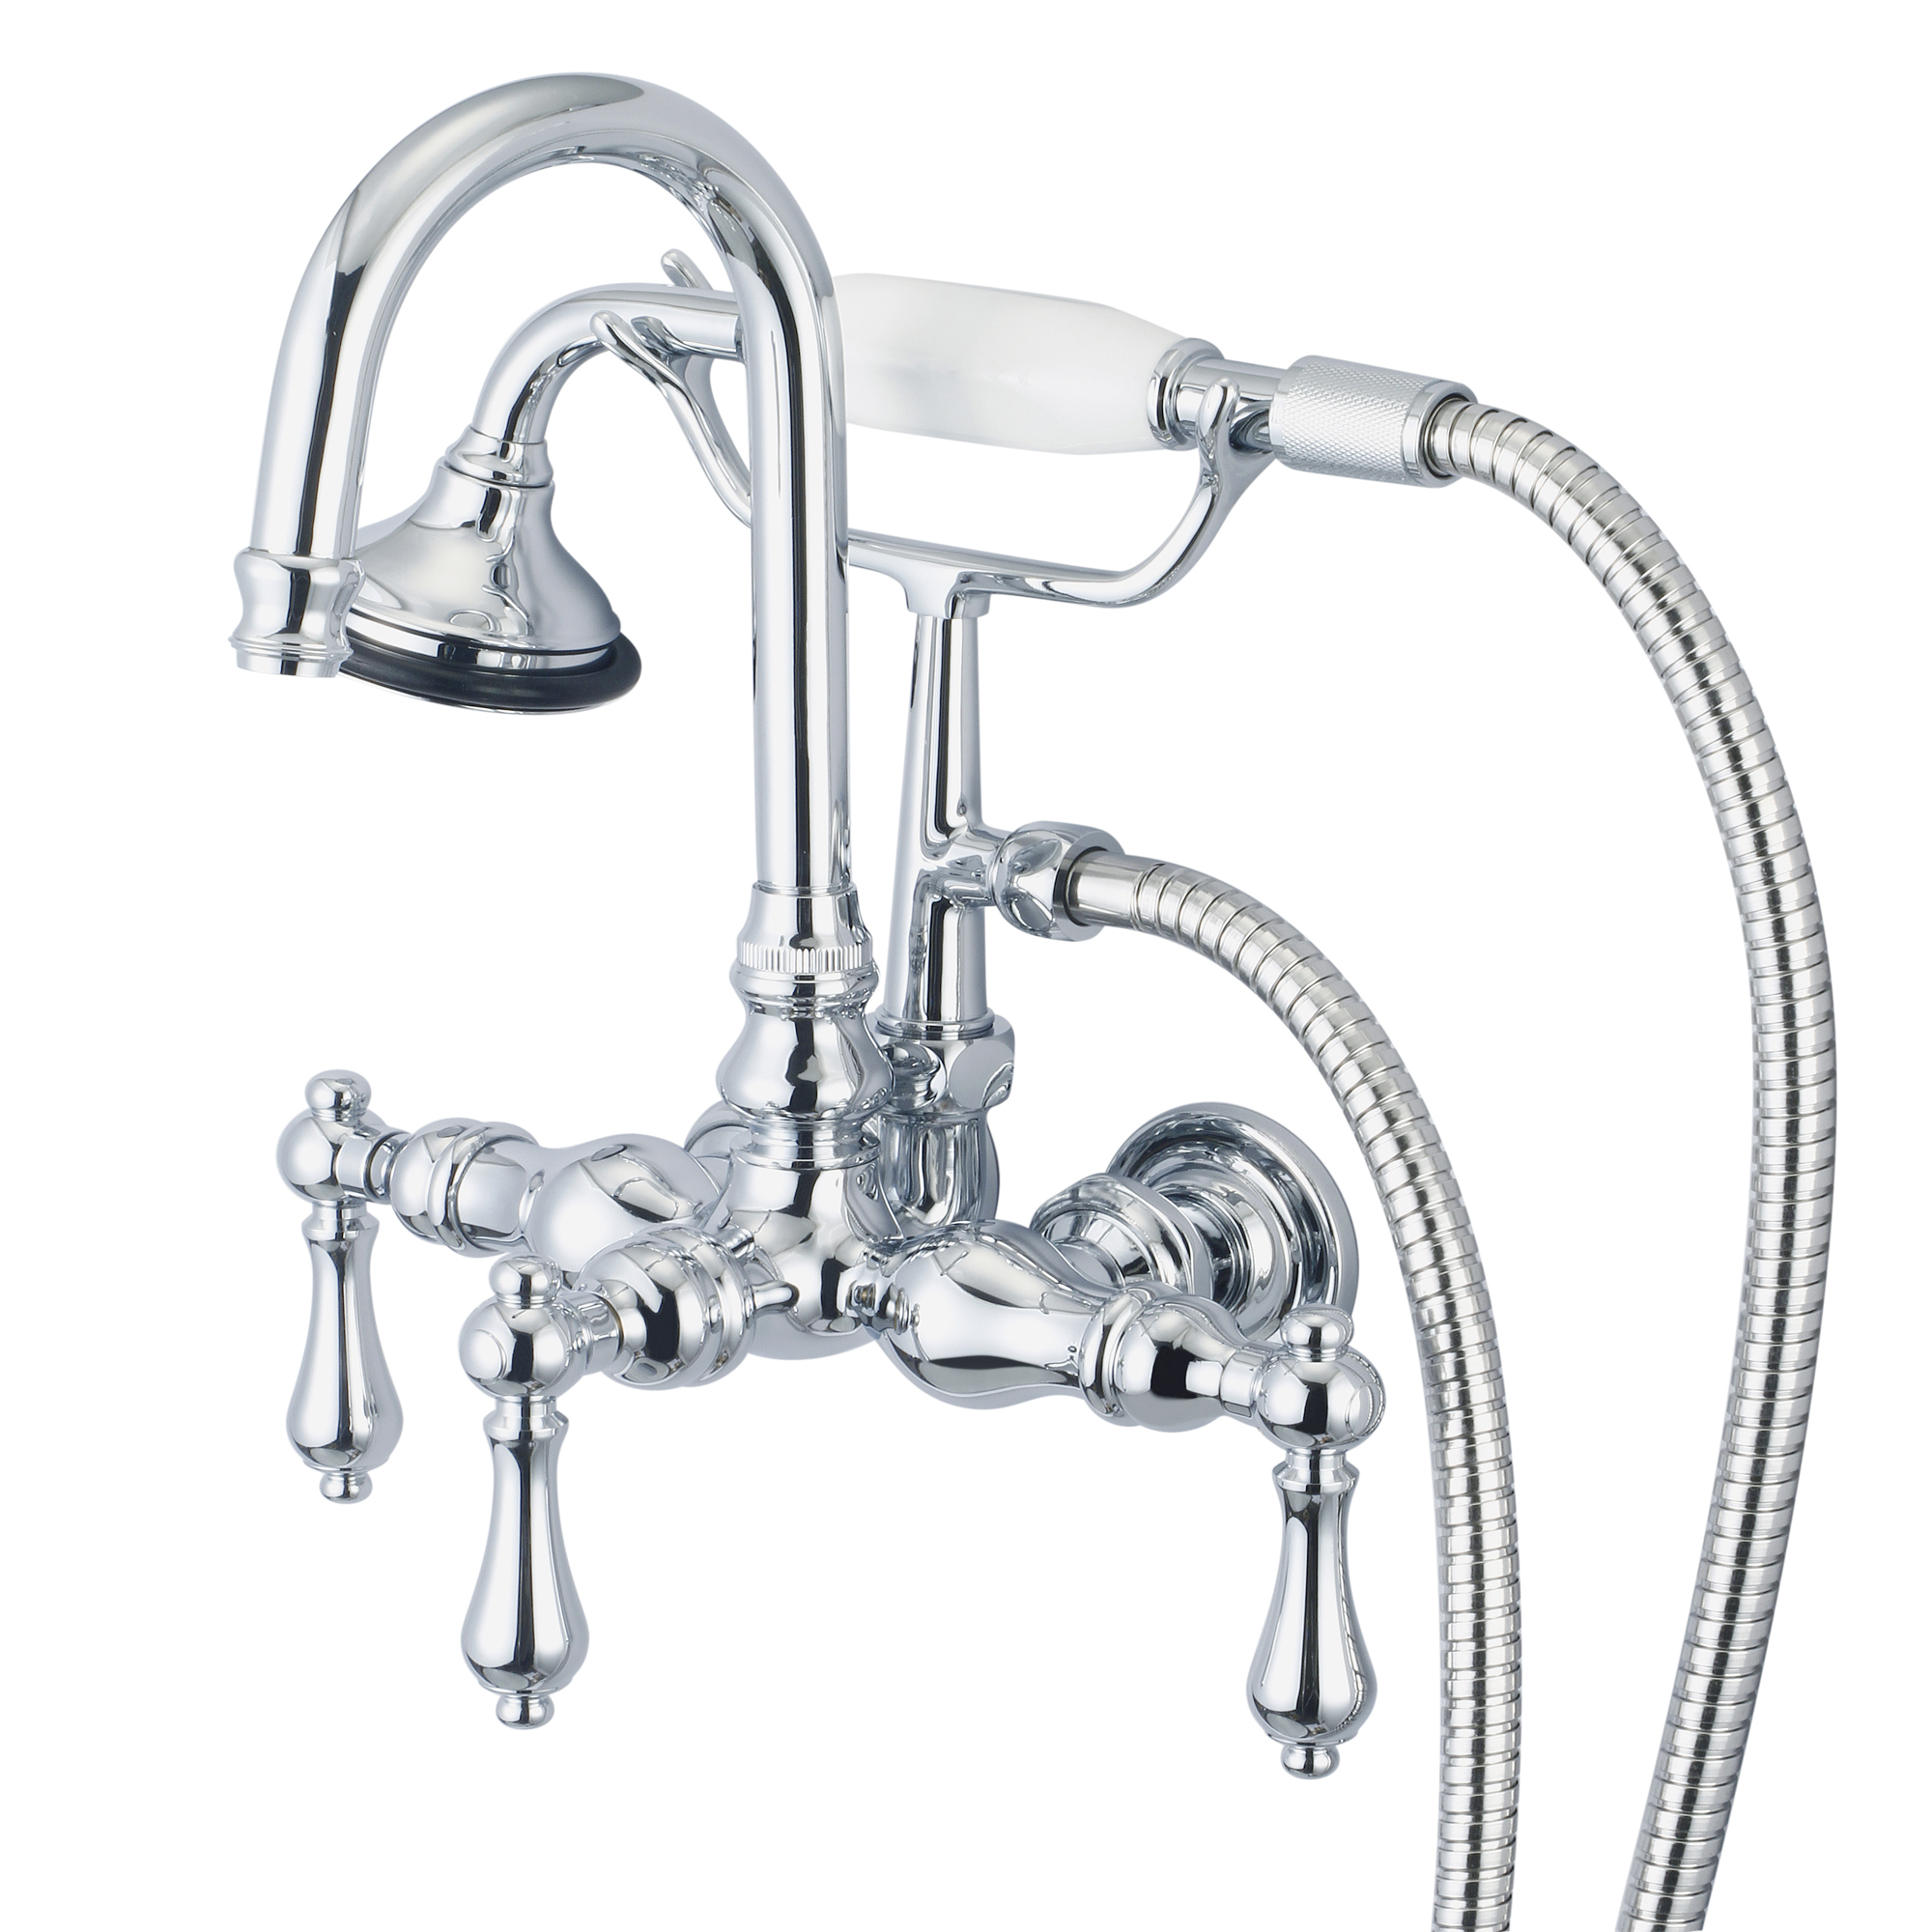 Vintage Classic 3.375 Inch Center Wall Mount Tub Faucet With Gooseneck Spout, Straight Wall Connector & Handheld Shower in Chrome Finish With Metal Lever Handles Without Labels